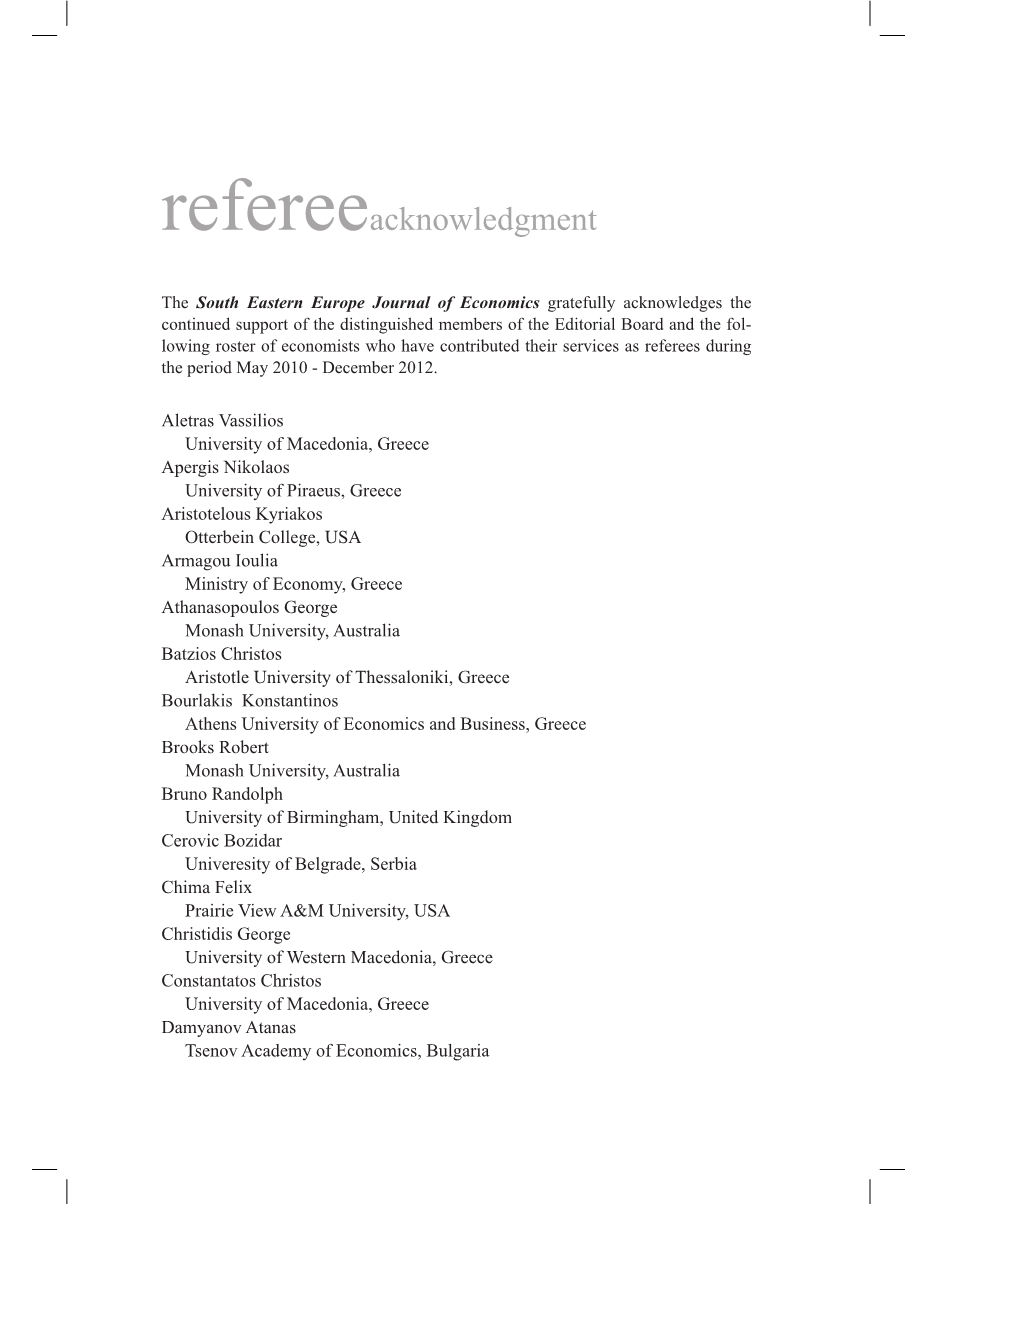 Referees Spring 2010-Fall 2012